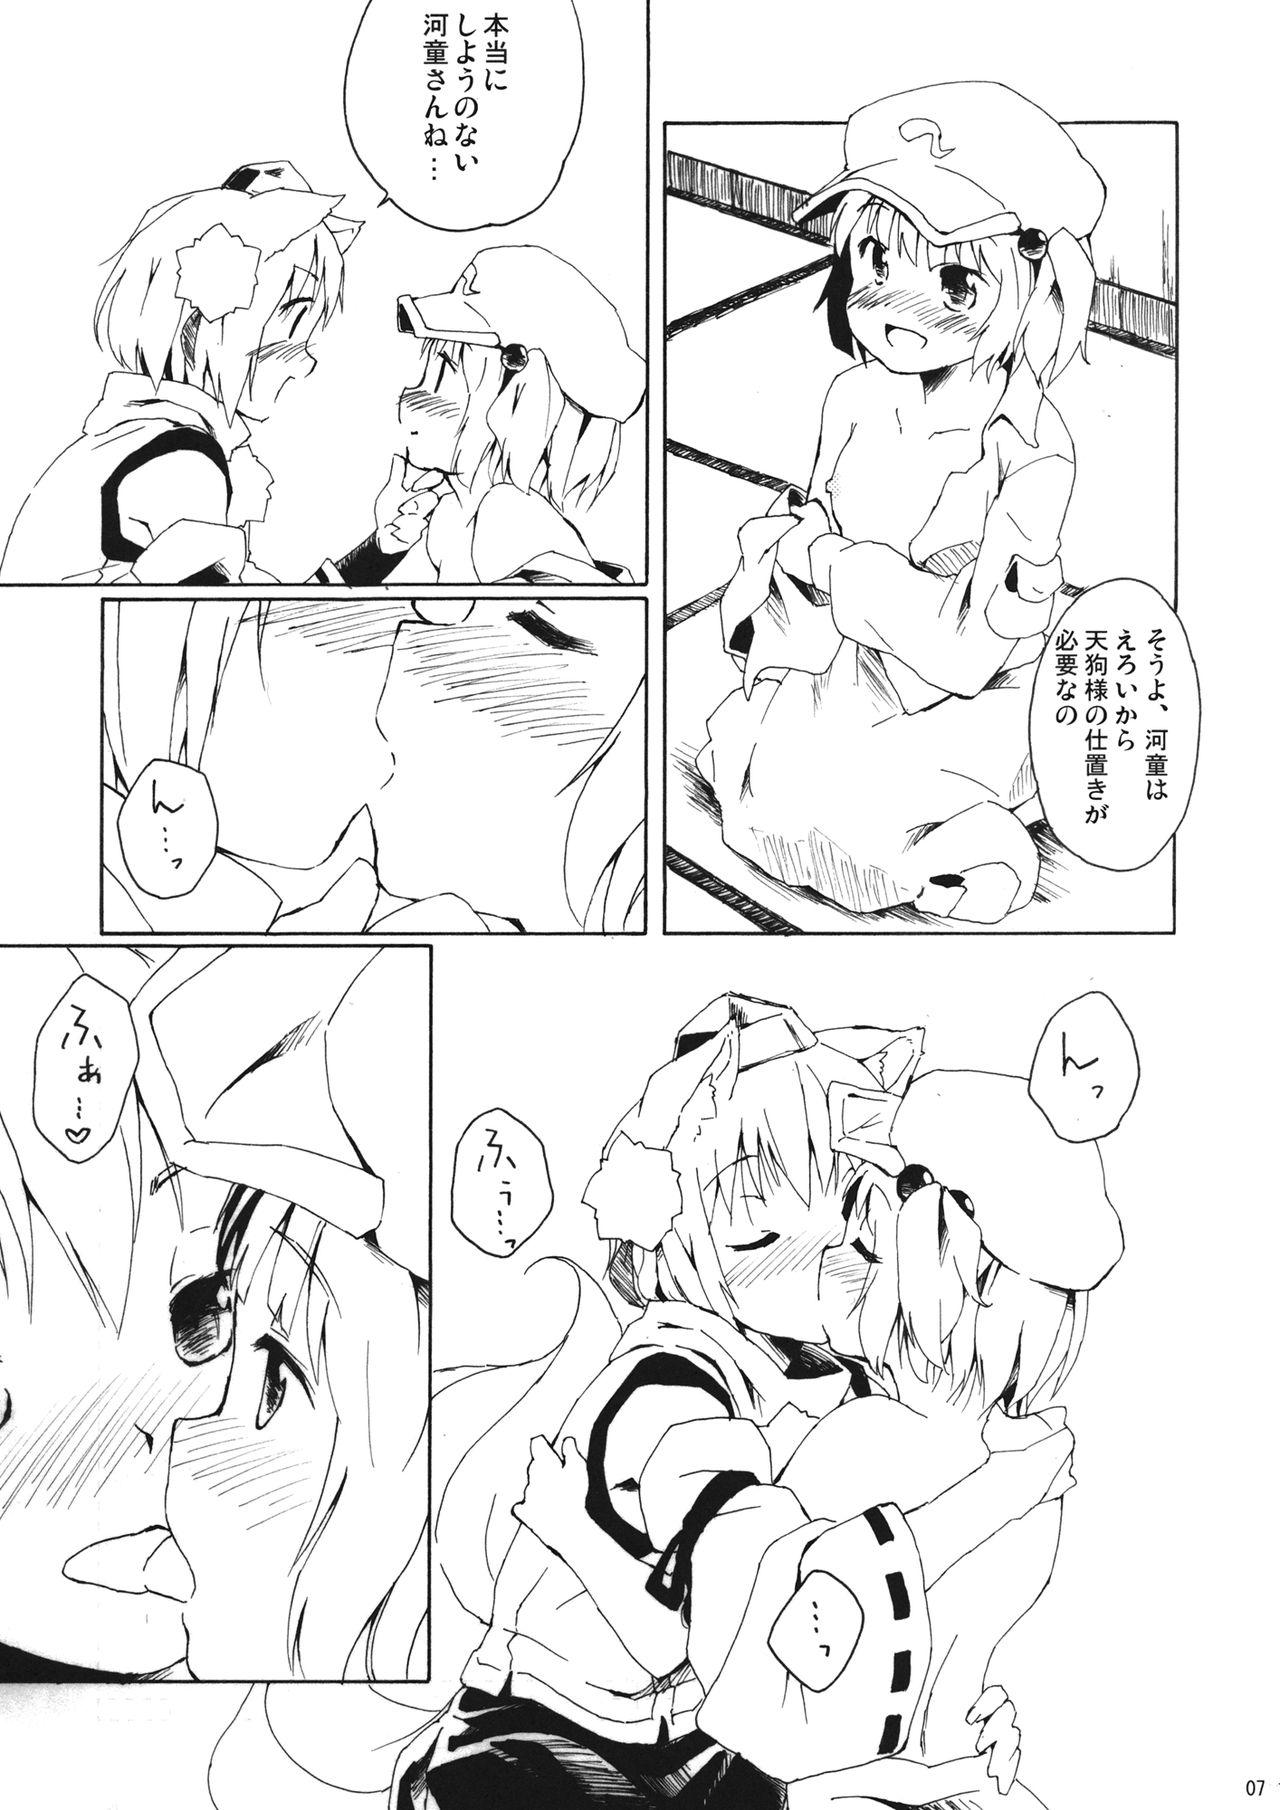 Playing Oh, Commie and Copper - Touhou project Erotica - Page 6